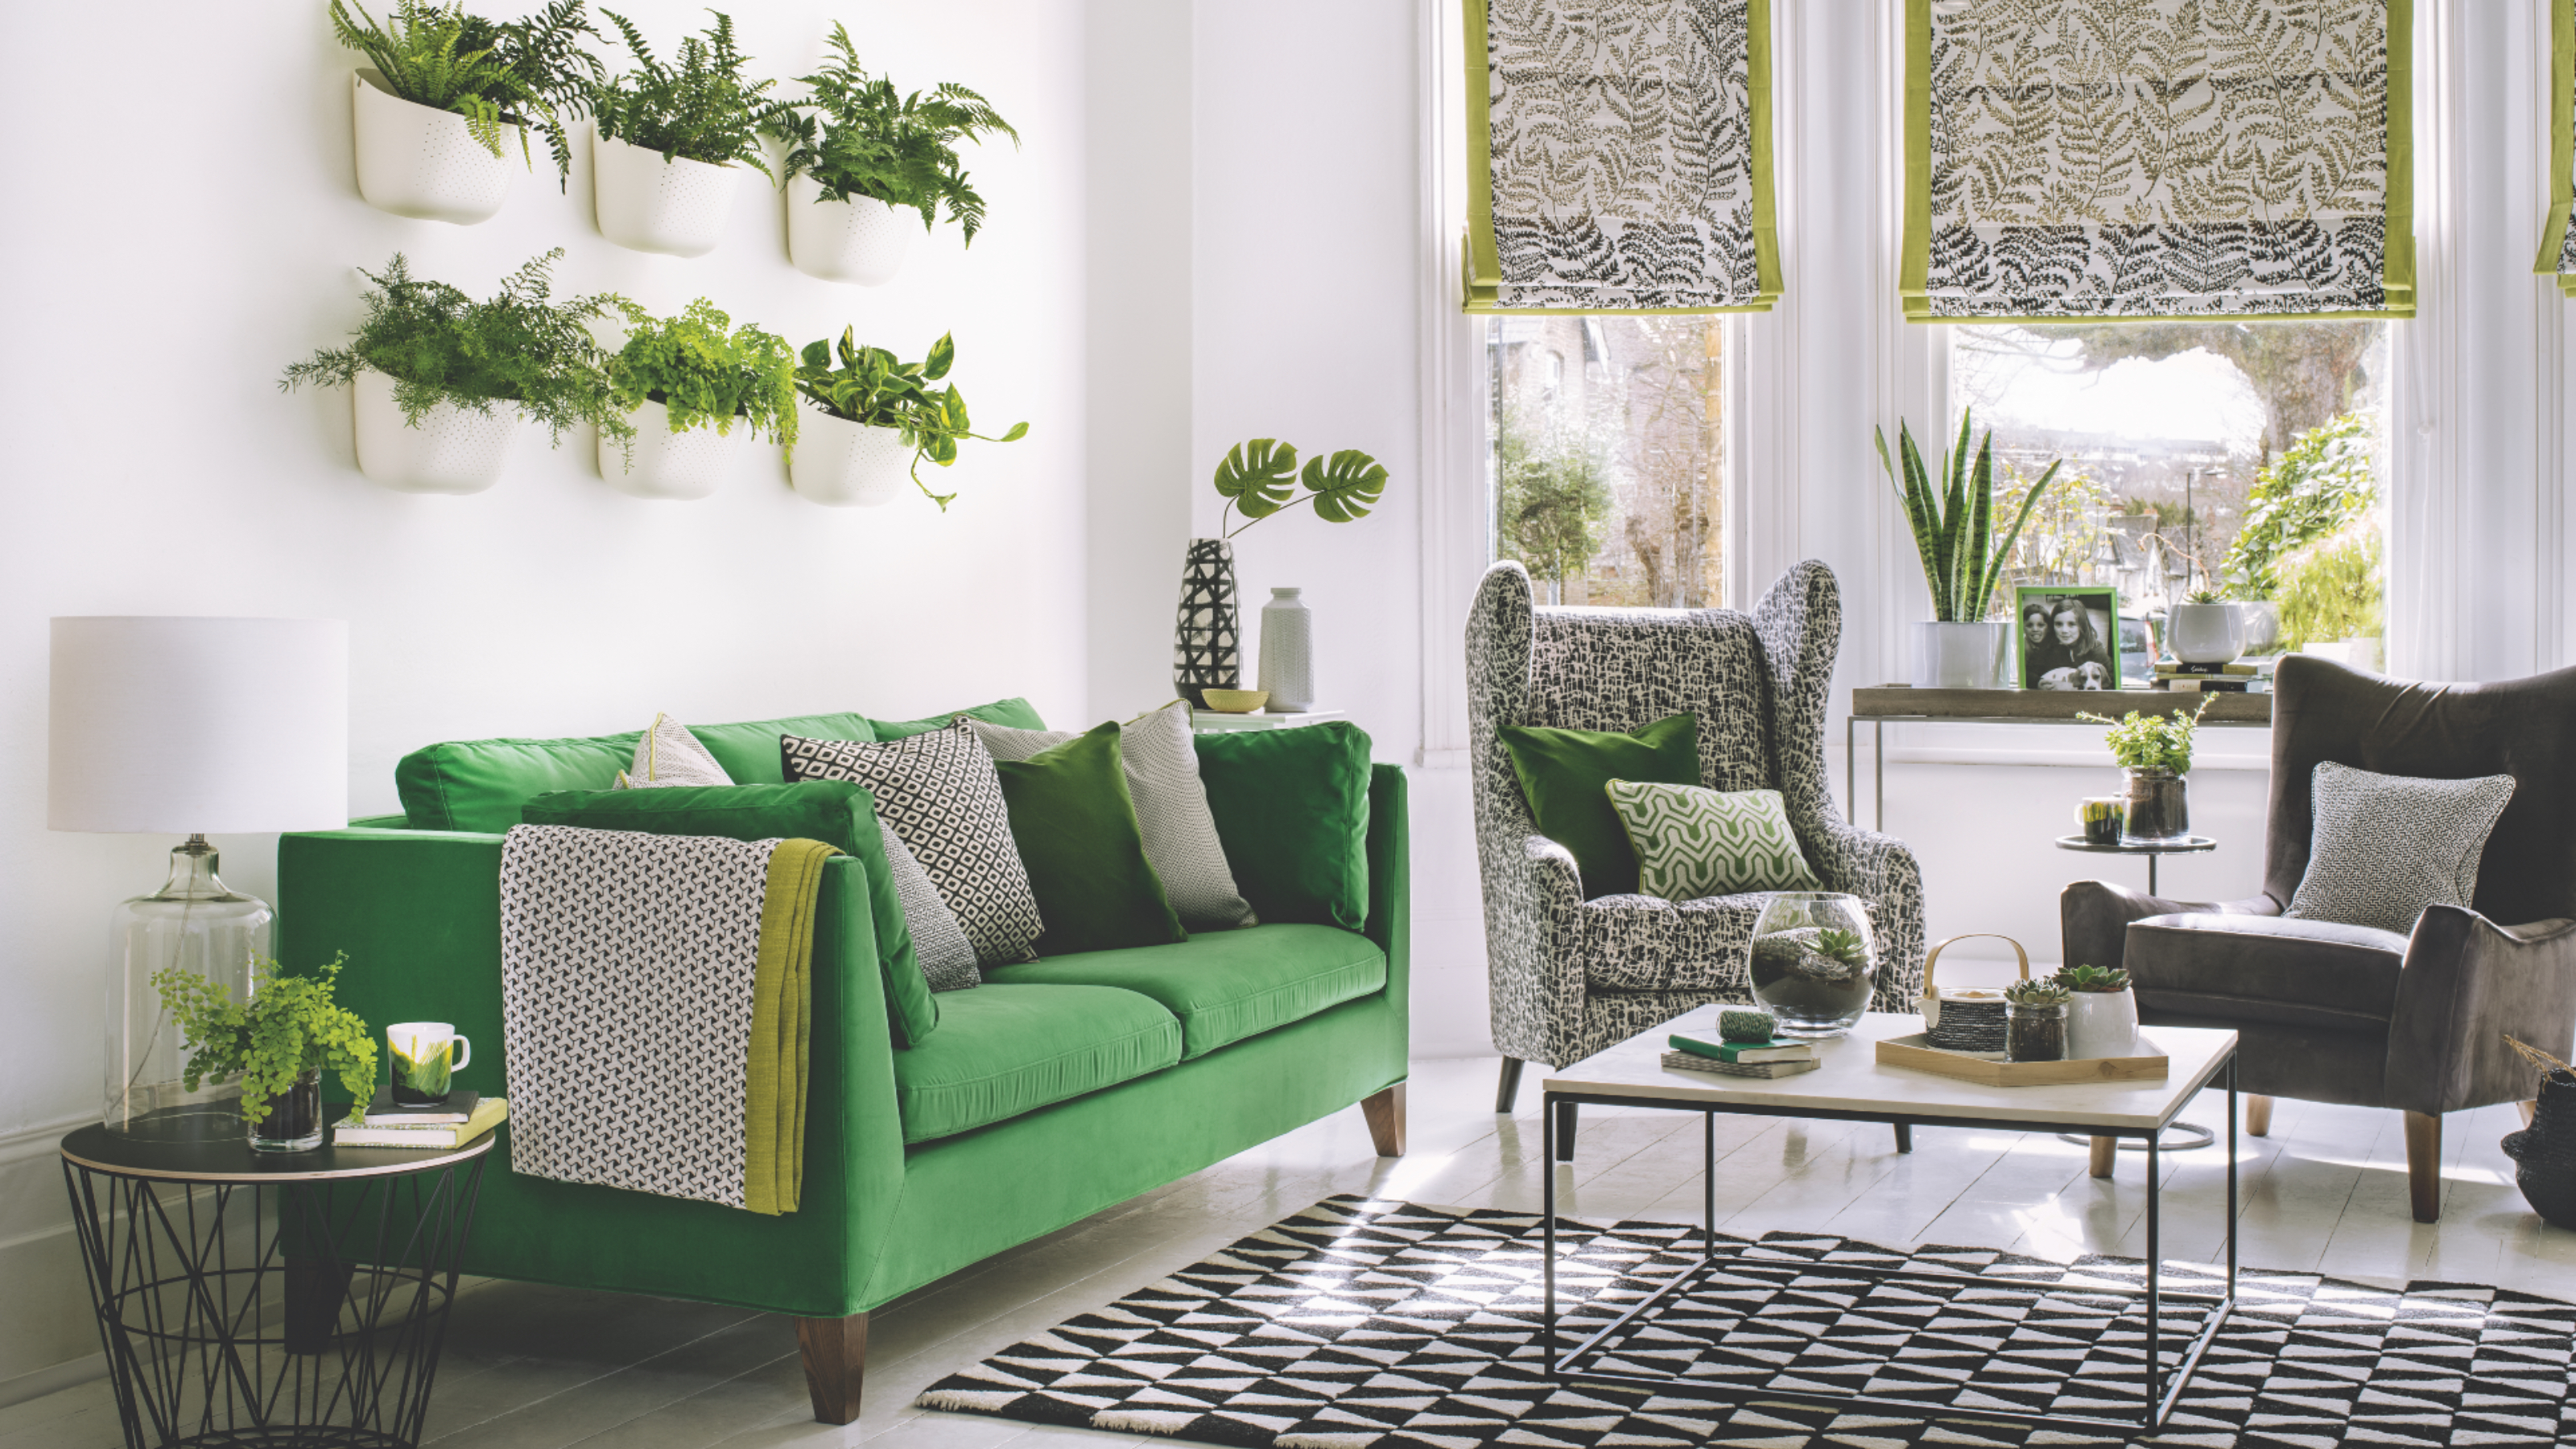 Living room houseplant ideas to elevate your space | Ideal Home